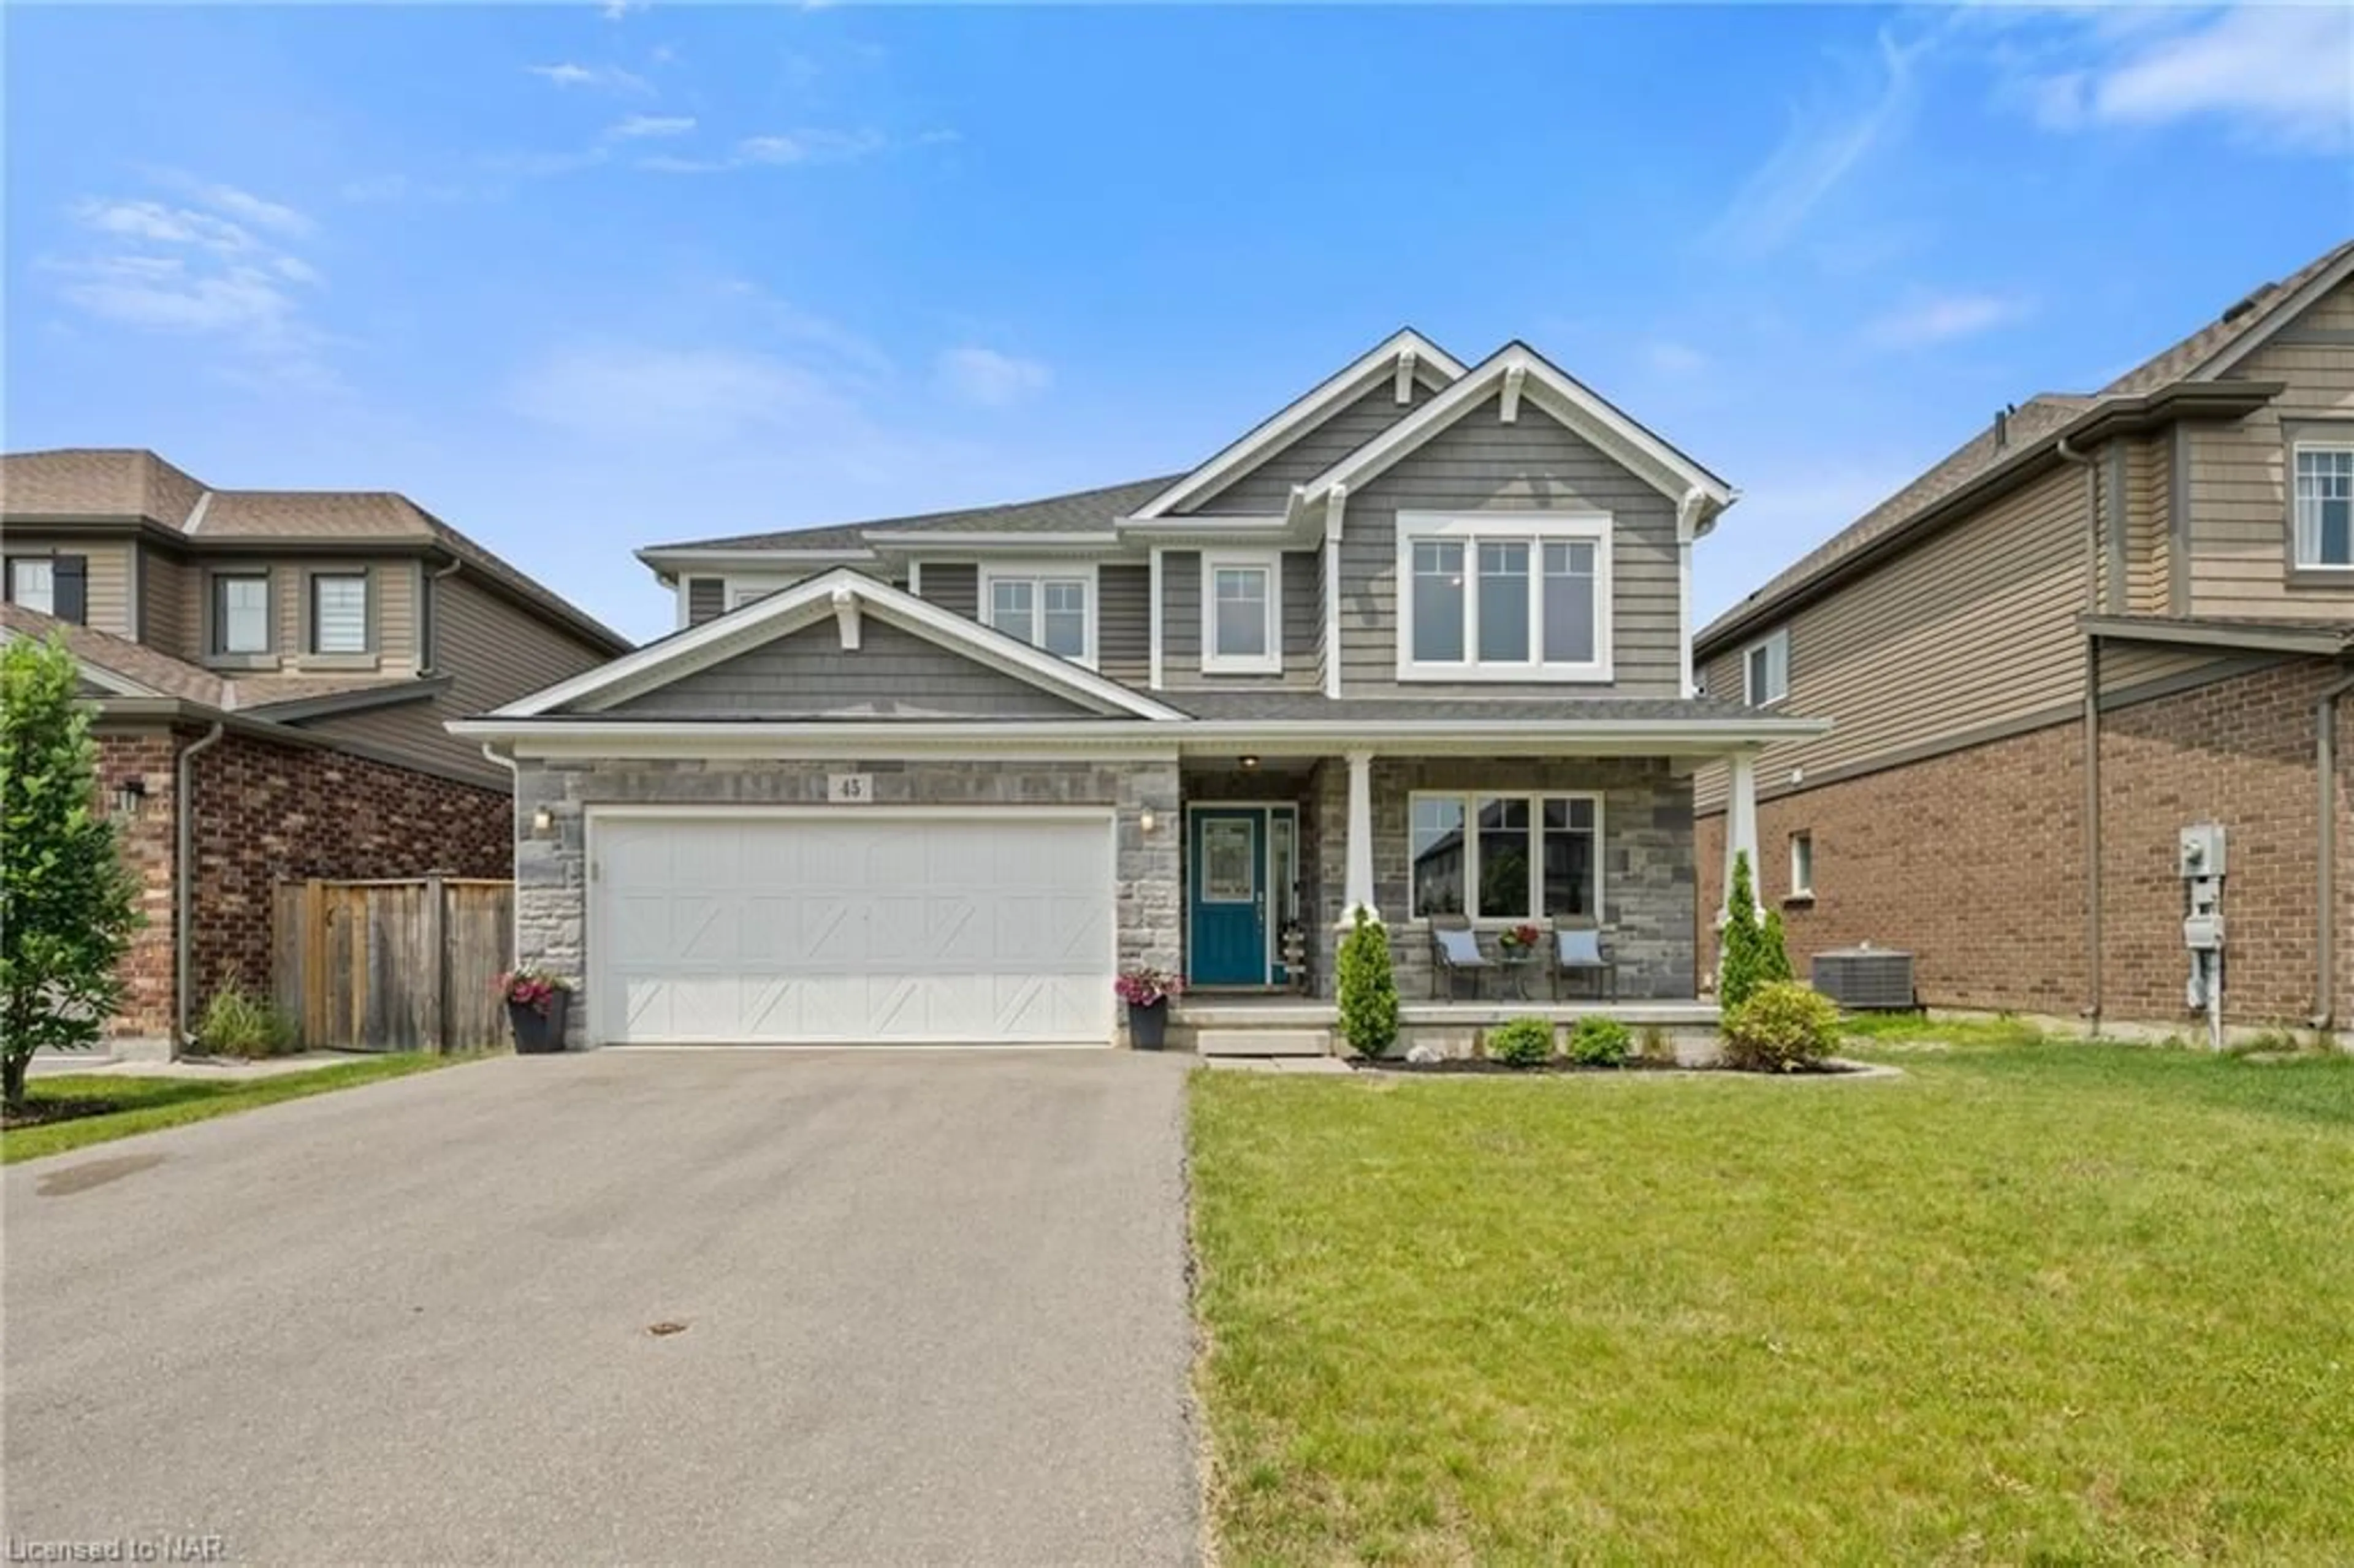 Frontside or backside of a home for 45 Roselawn Cres, Welland Ontario L3C 0C3